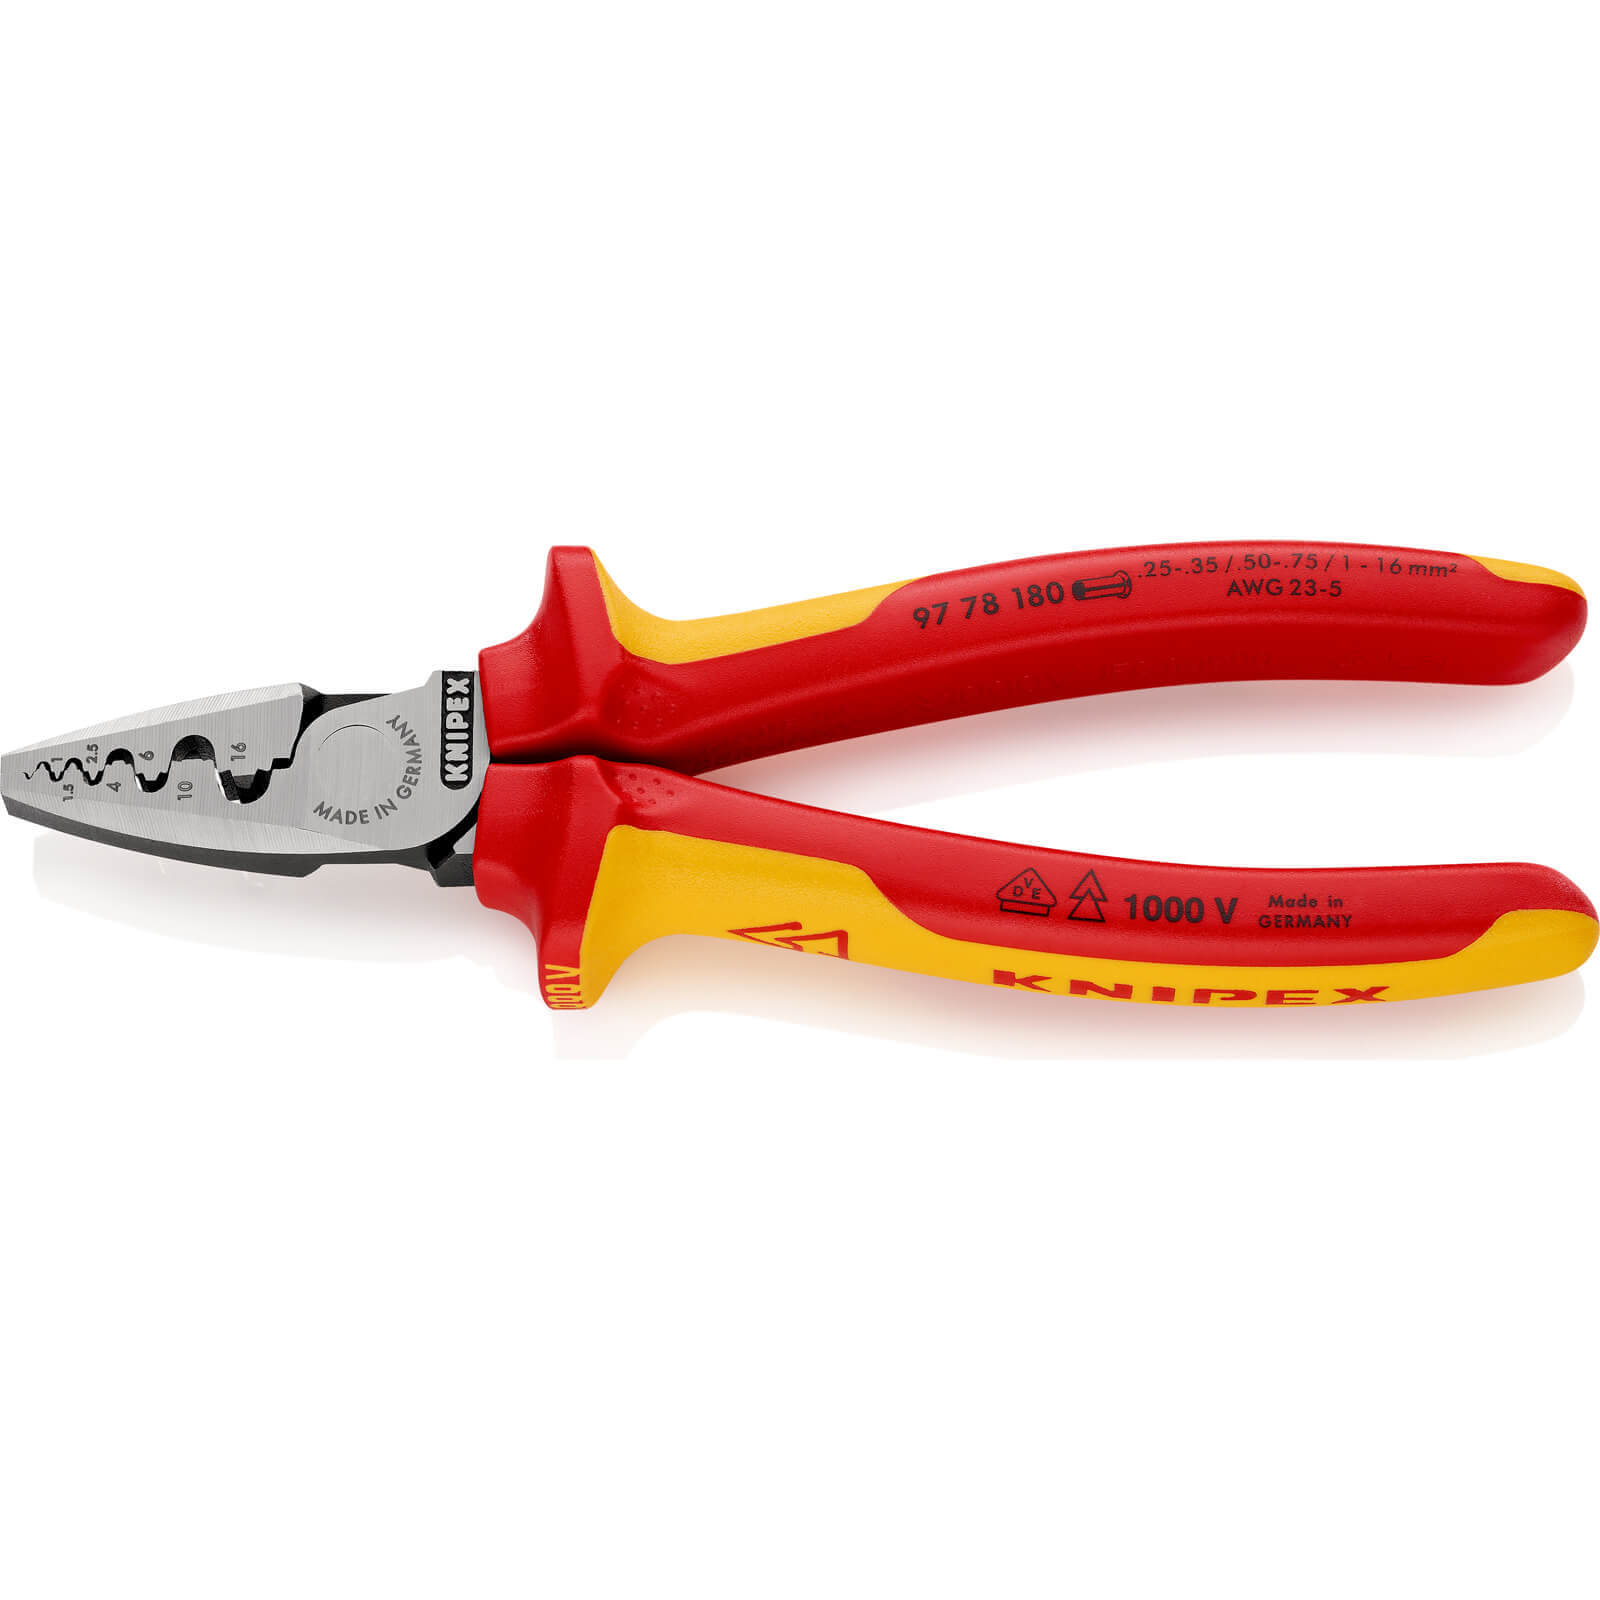 Photo of Knipex 97 78 Vde Insulated Crimping Pliers